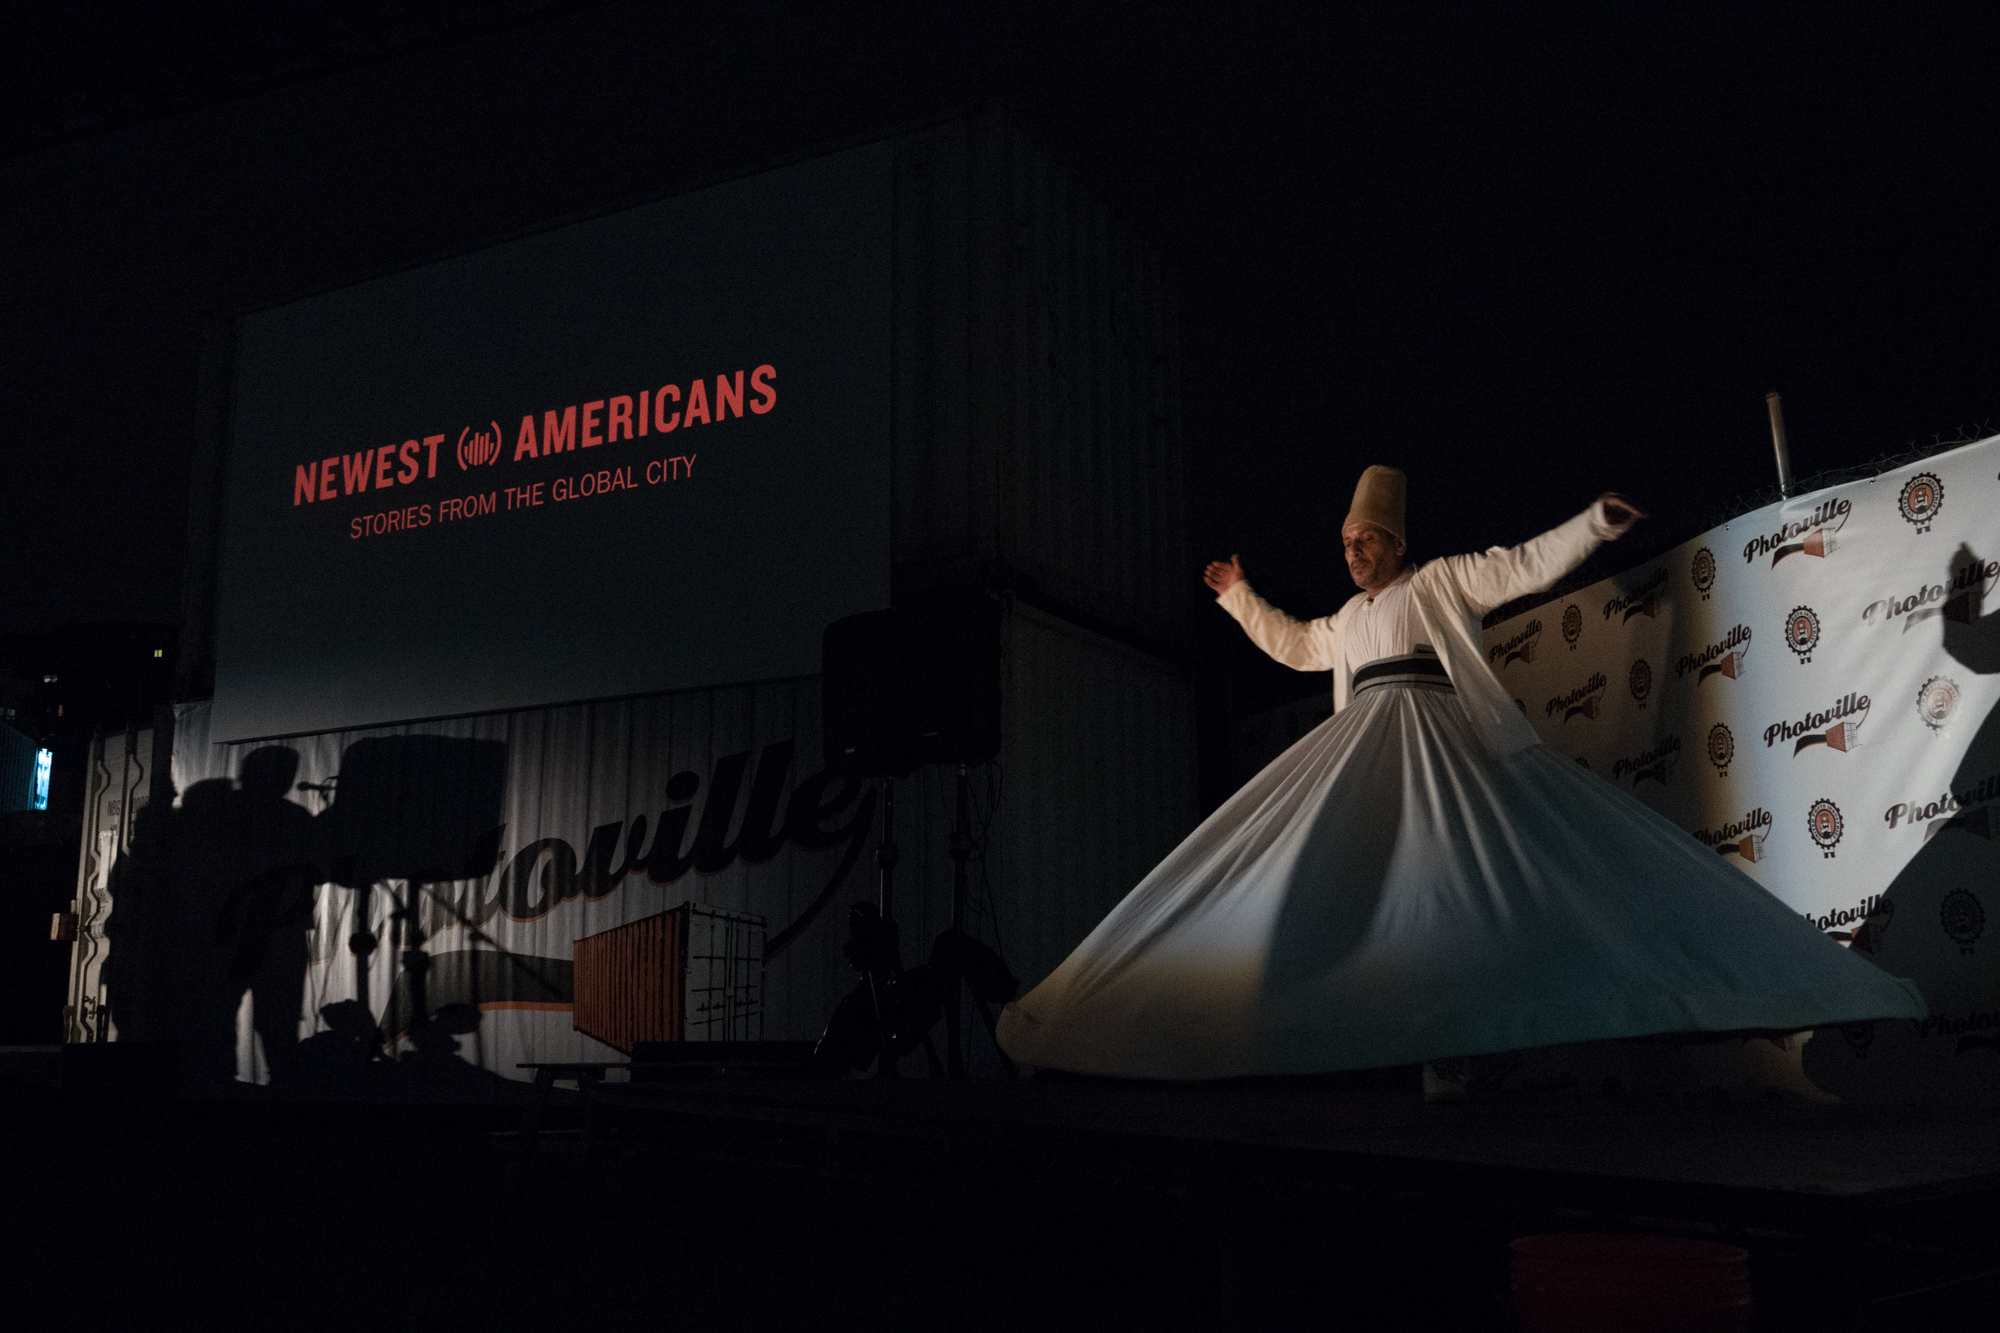  A whirling dervish spins to traditional Syrian music at the end of Newest Americans' Opening Night presentation at Photoville 2017. (Photo by Stephanie Khoury)&nbsp; 